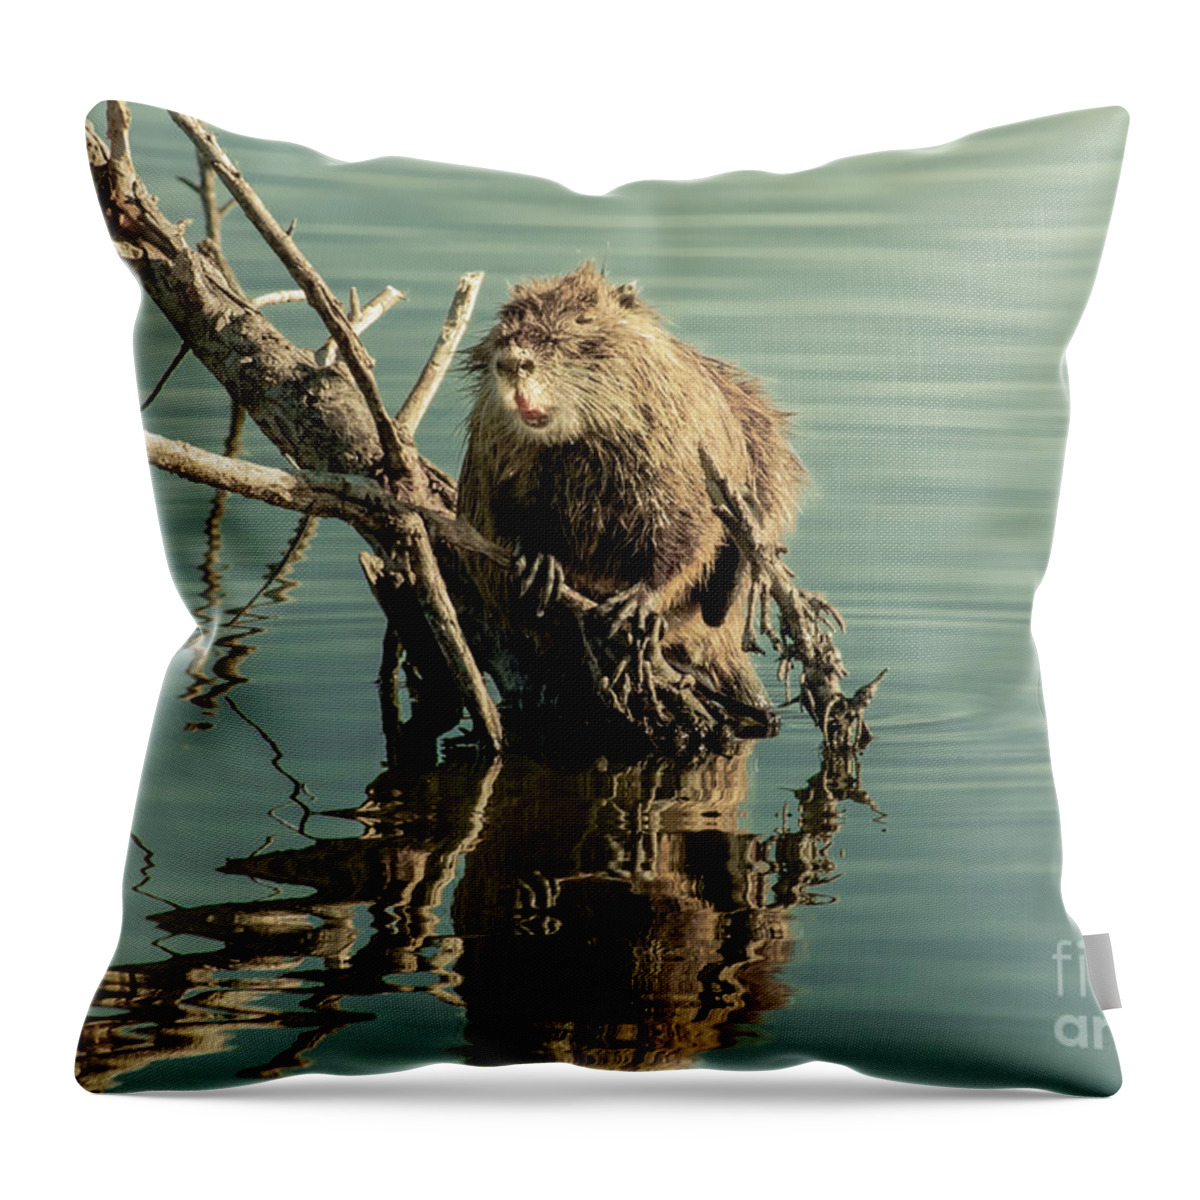 Animal Throw Pillow featuring the photograph Nutria On Stick-Up by Robert Frederick